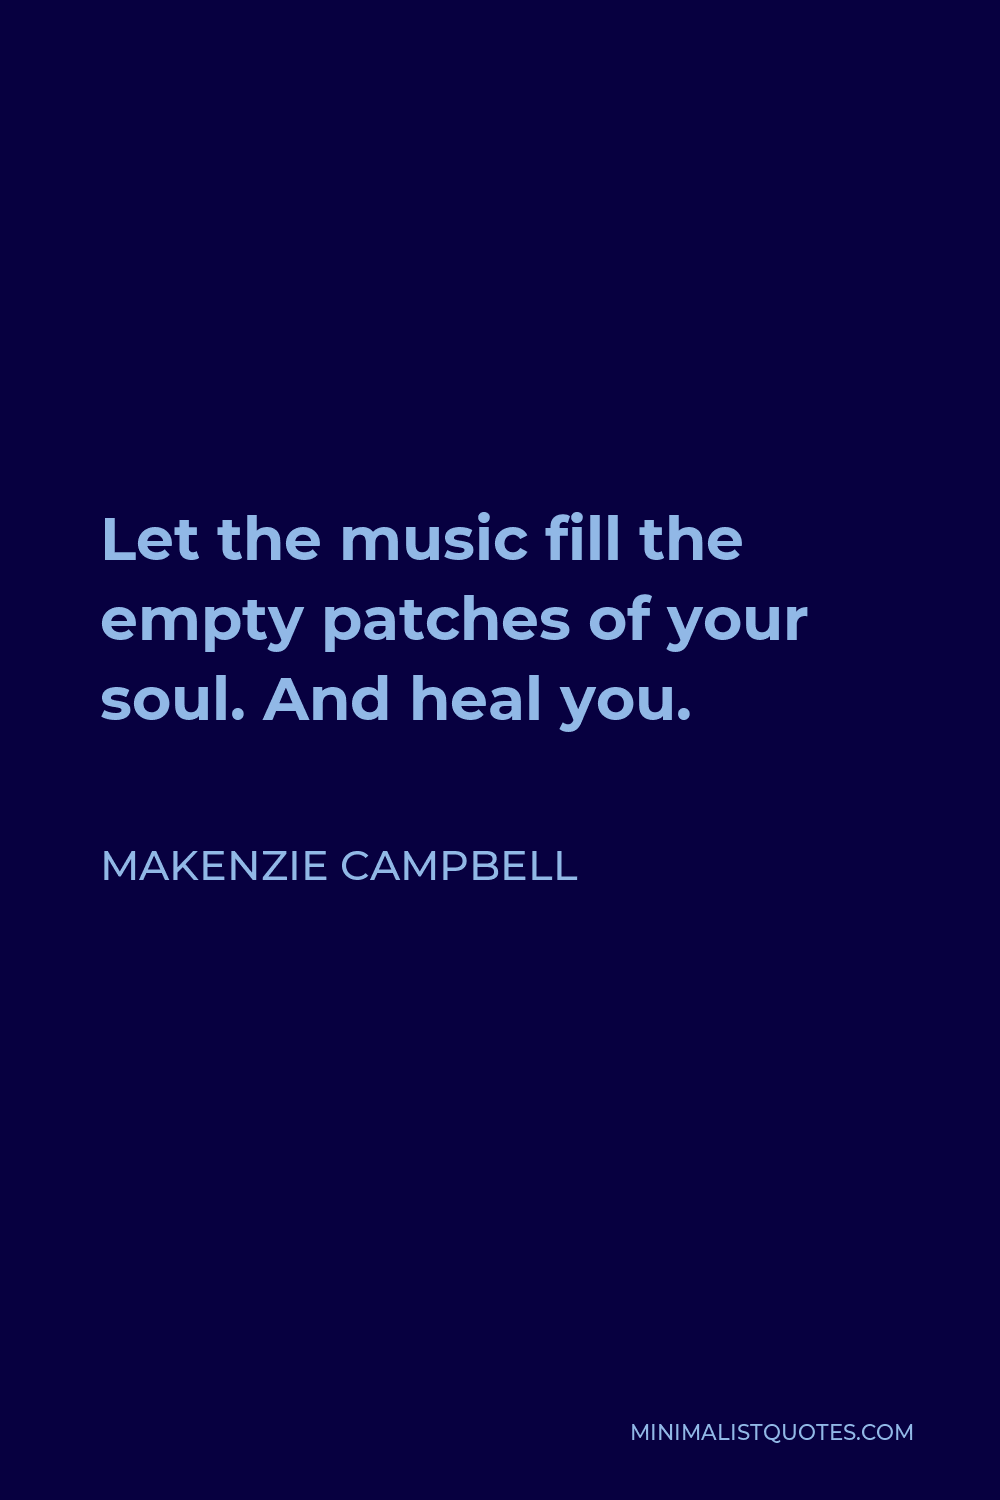 Makenzie Campbell Quote - Let the music fill the empty patches of your soul. And heal you.